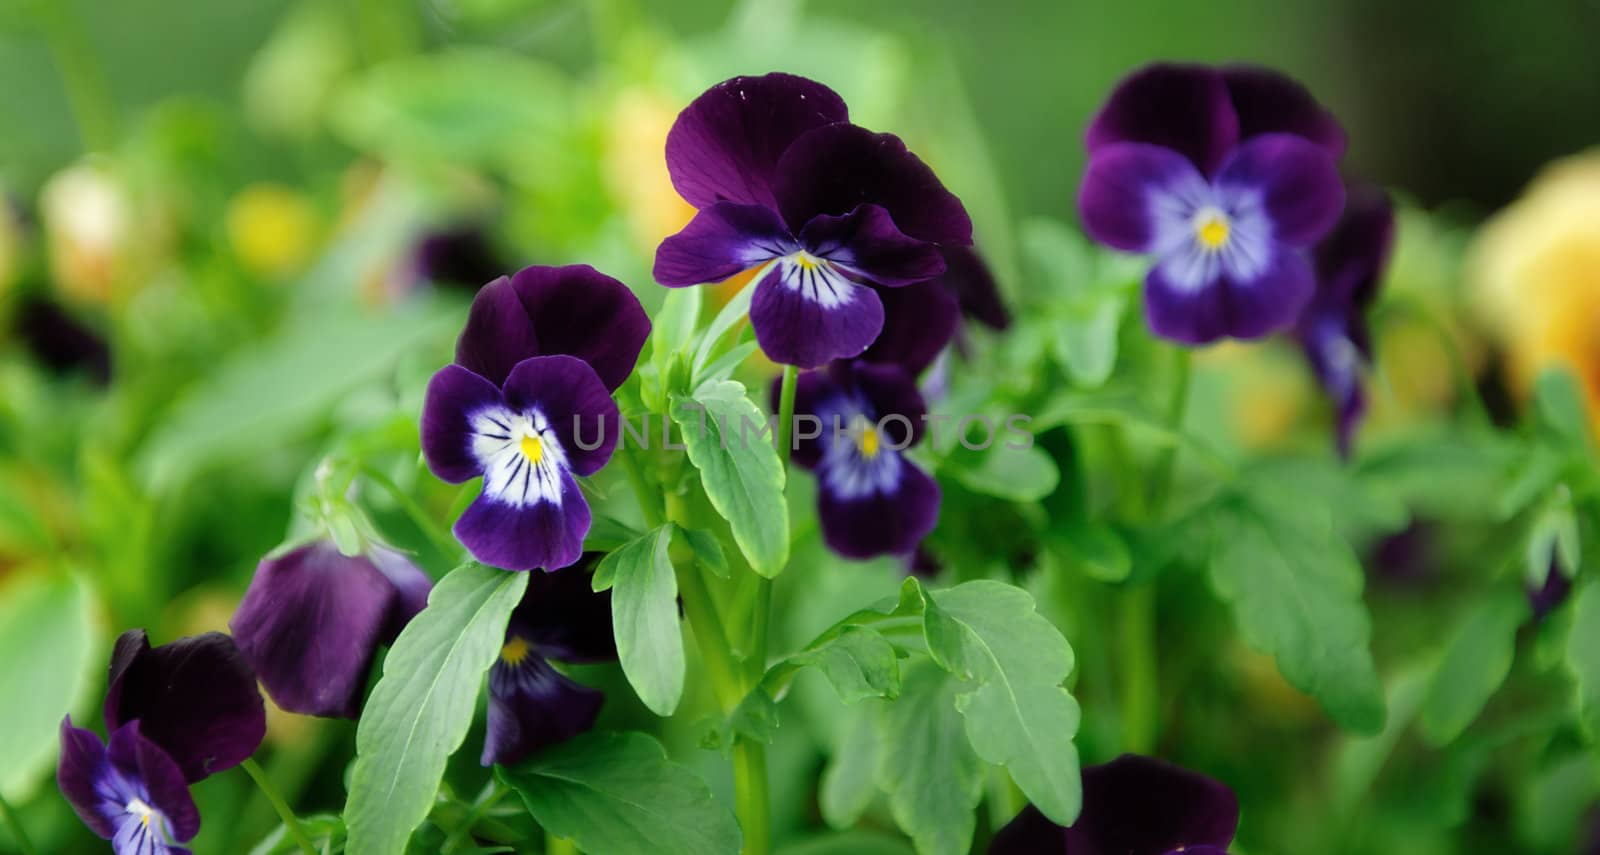 Pansies by dragon_fang